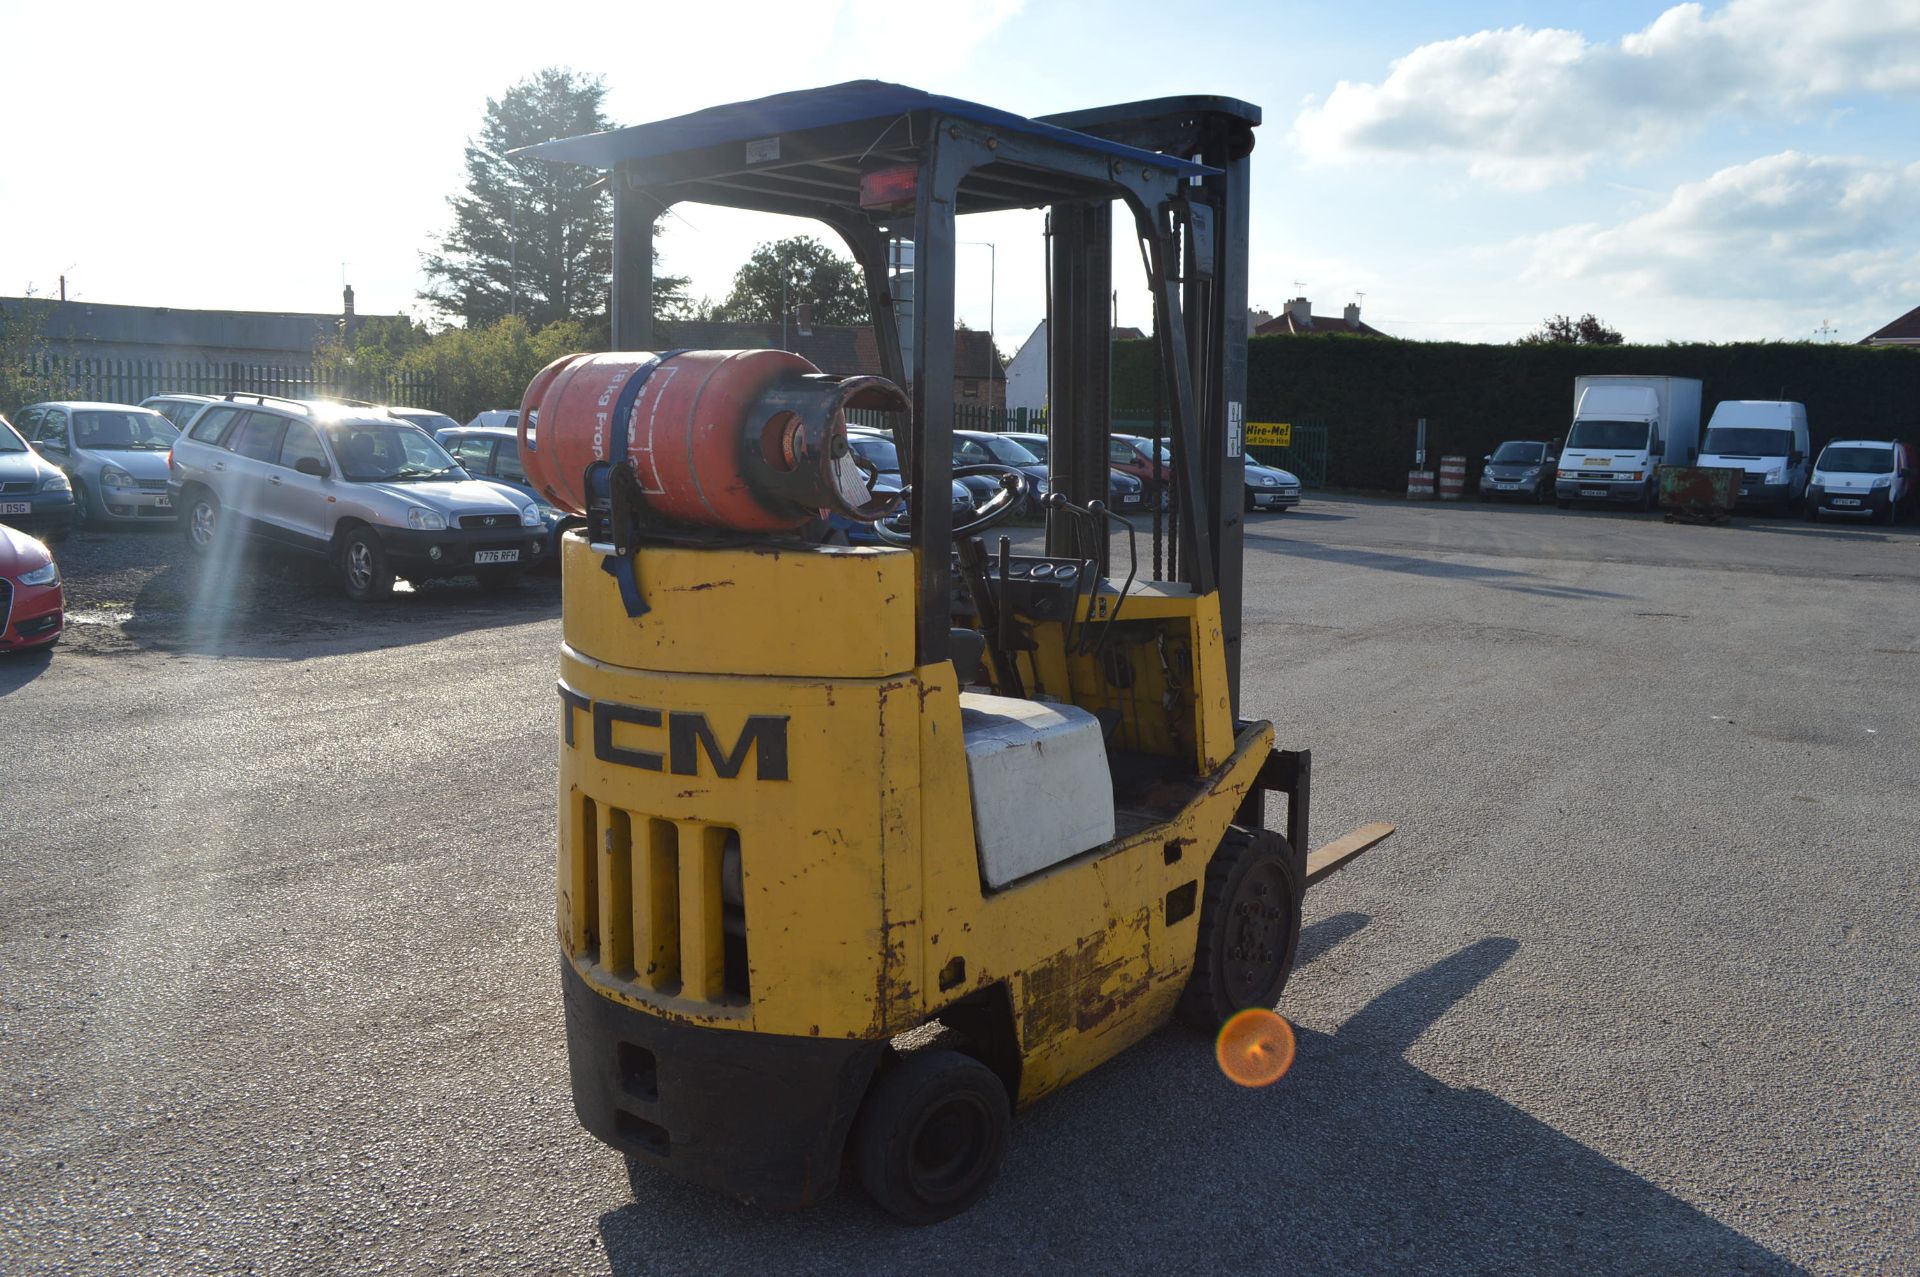 TCM 1.75T LPG FORKLIFT - GAS BOTTLE NOT INCLUDED   BRAKES GOOD RATED CAPACITY: 1600KG MAX FORK - Image 6 of 14